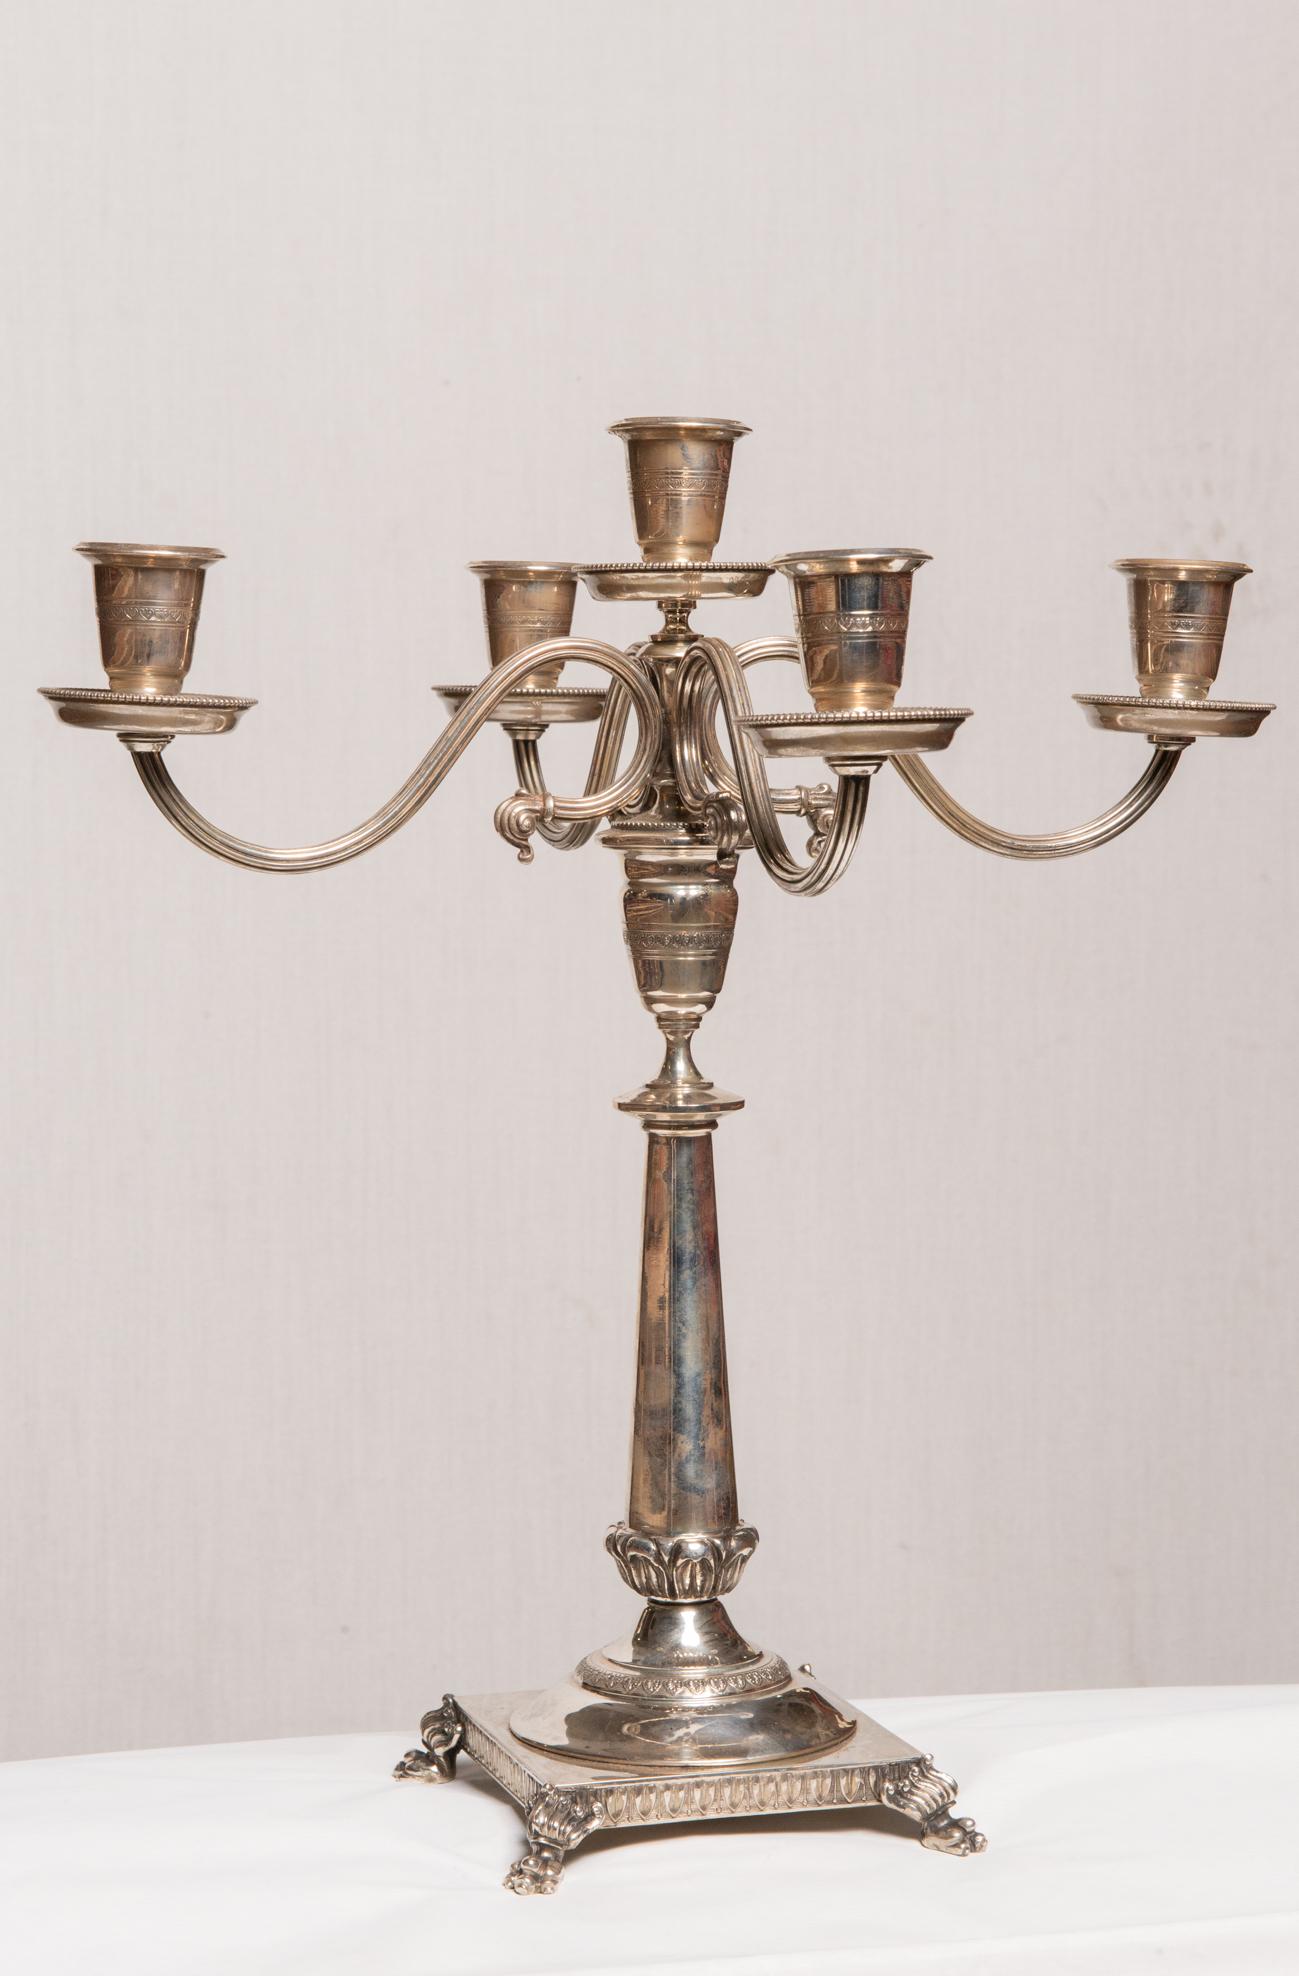 A/61 - Pair of silver Italian 5-flame candelabra in Empire style: very elegant, perfect ! 
No other comments. Also : that's a good price because I want close my activities.
Weight of silver: kg. 29,52 = libbre 65.080.

ref. A/61.